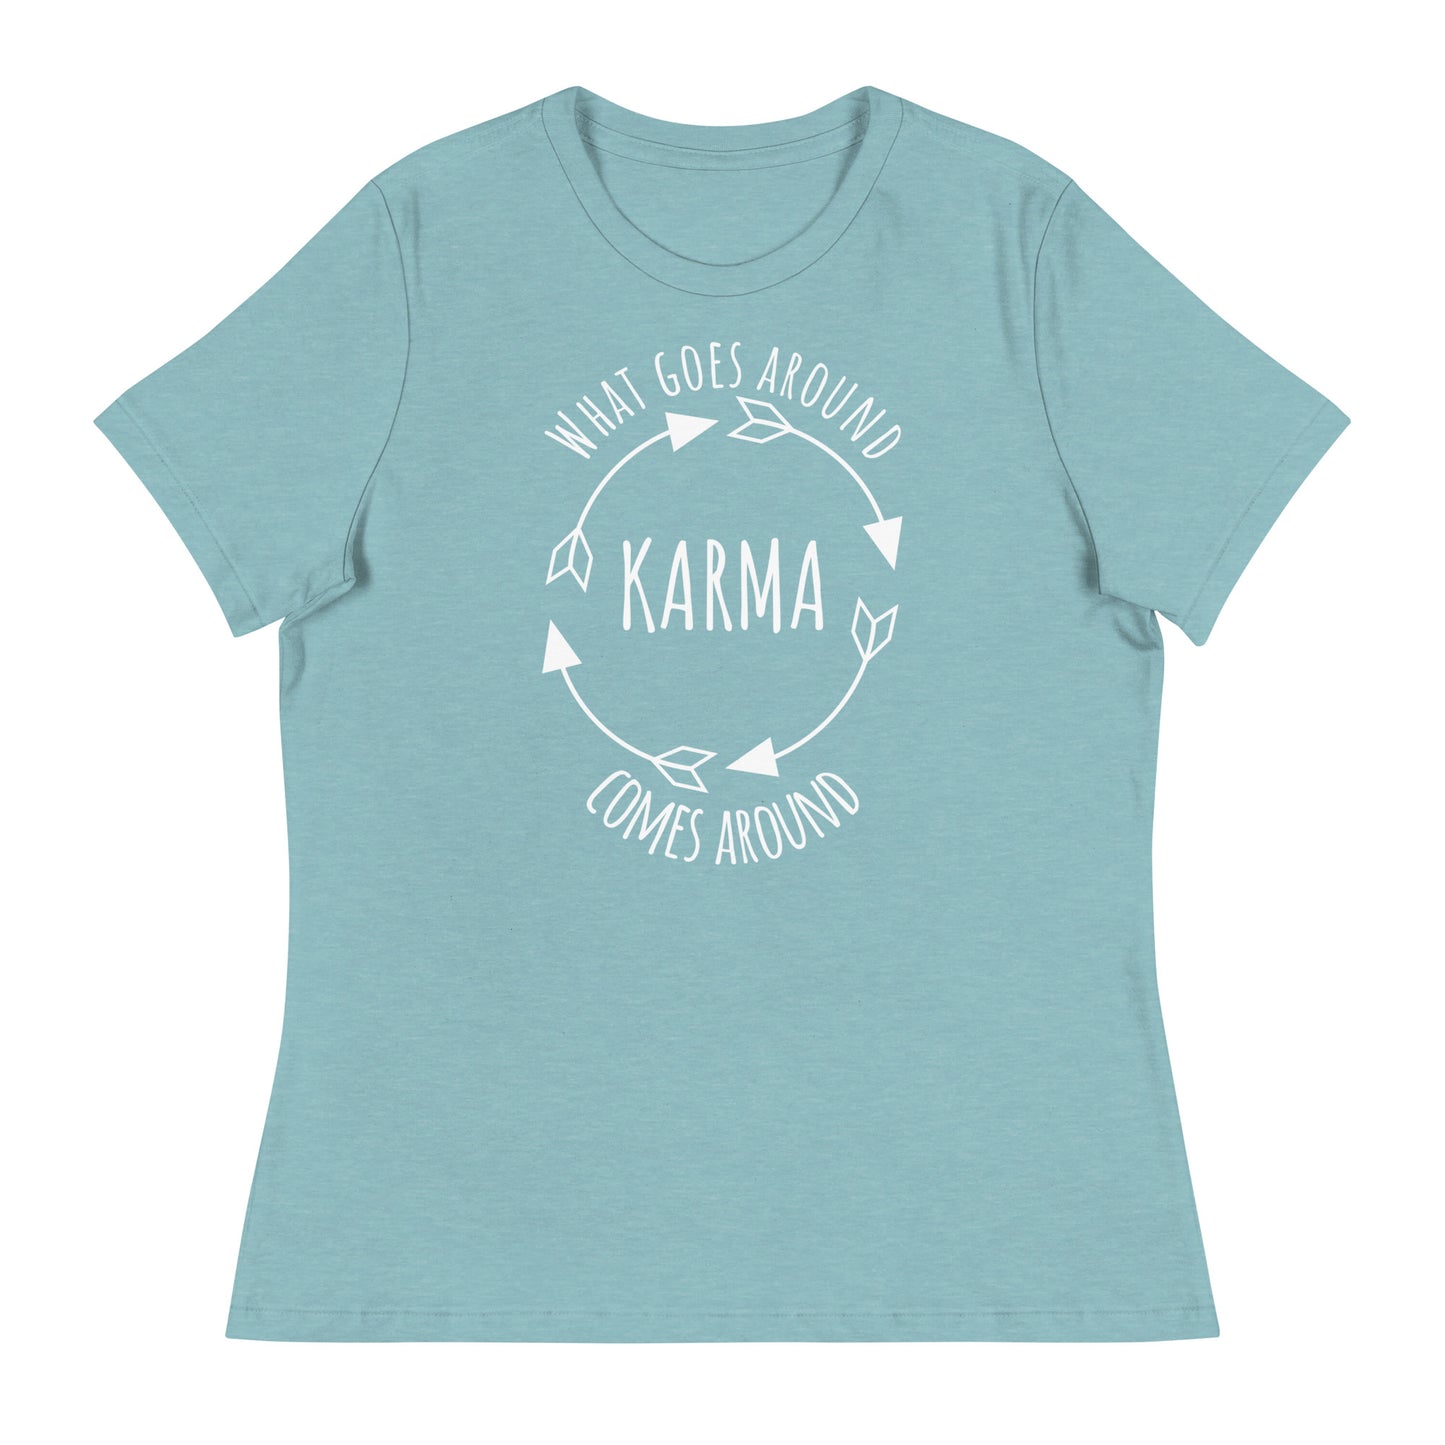 KARMA - what goes around comes around - women's tee (white lettering)